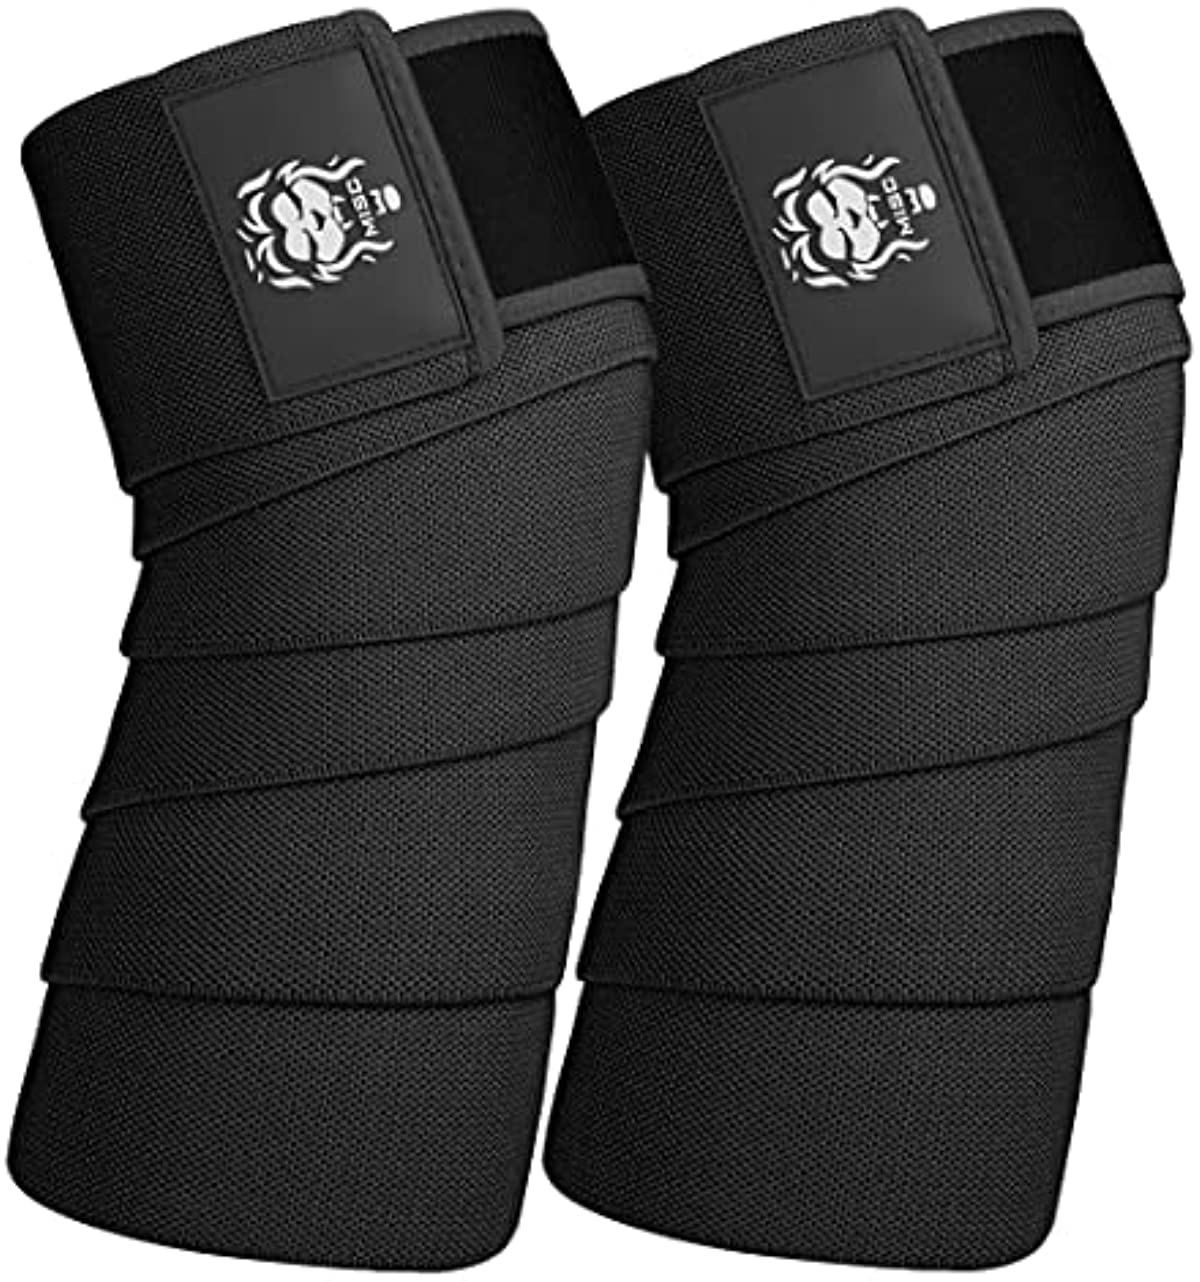 MISC Brands Knee Braces for Knee Pain – One Pair Knee Wraps with Hook and Loop Closure – Stretchable Nylon and Spandex Knee Sleeves – Optimal Knee Compression for Men and Women